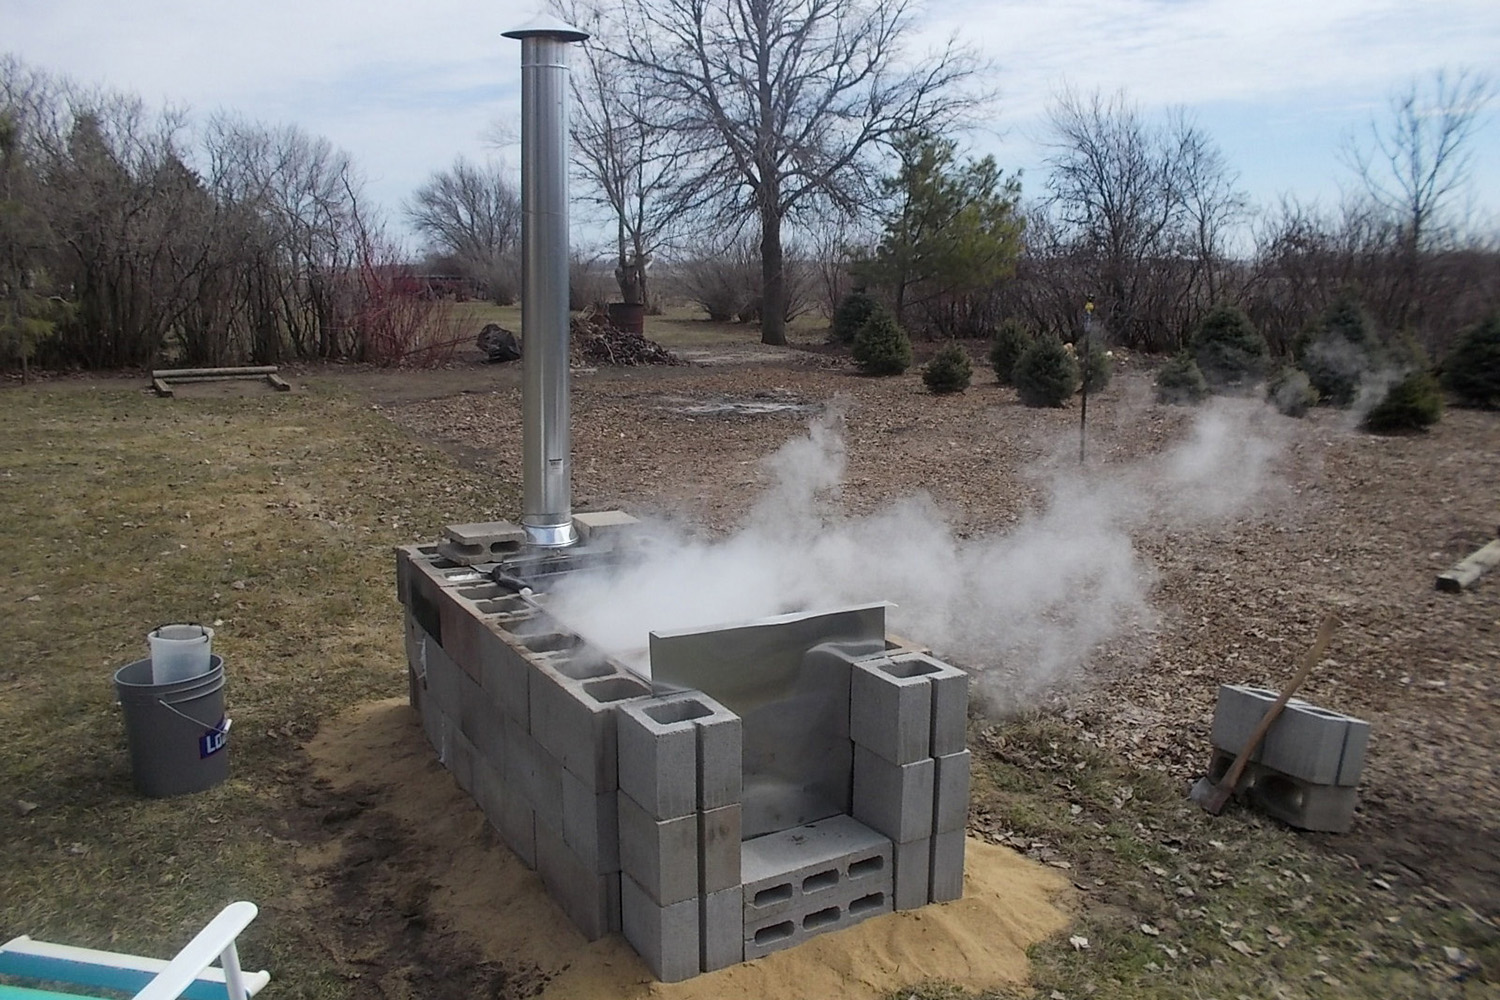 a home evaporator made of cinder blocks with a tall silver chimney